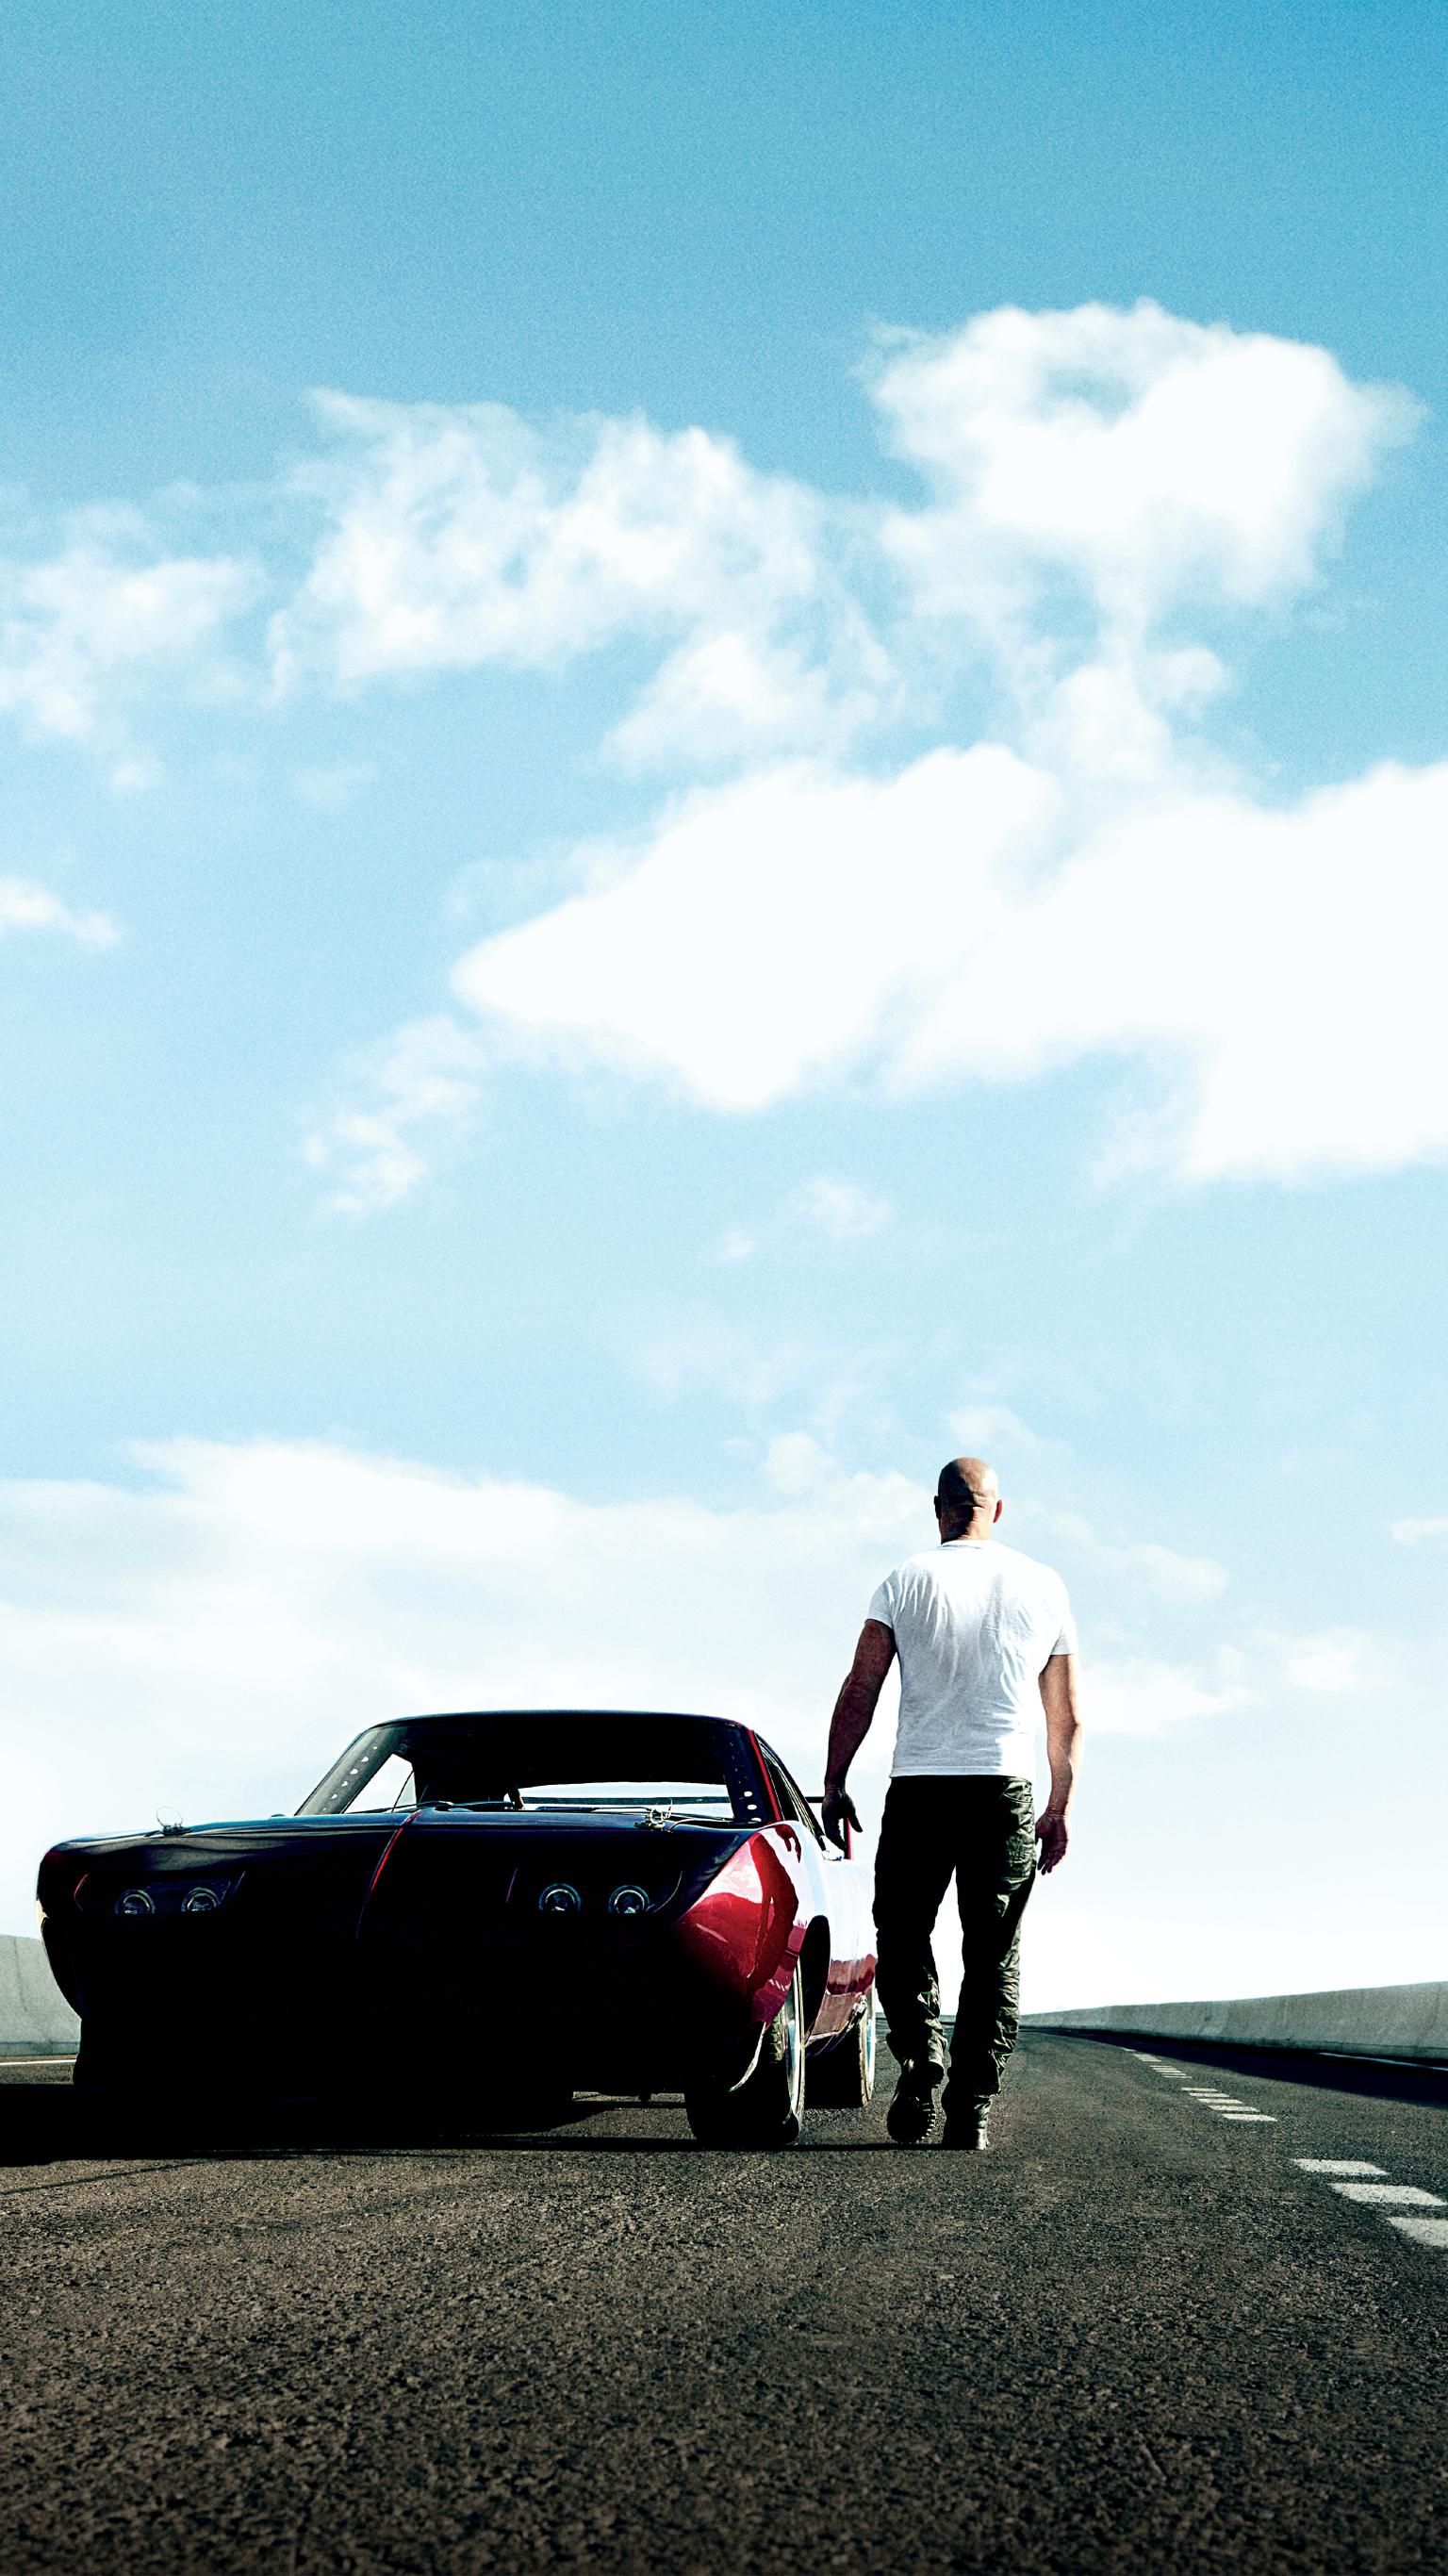 fast and furious 8 full movie download for mobile